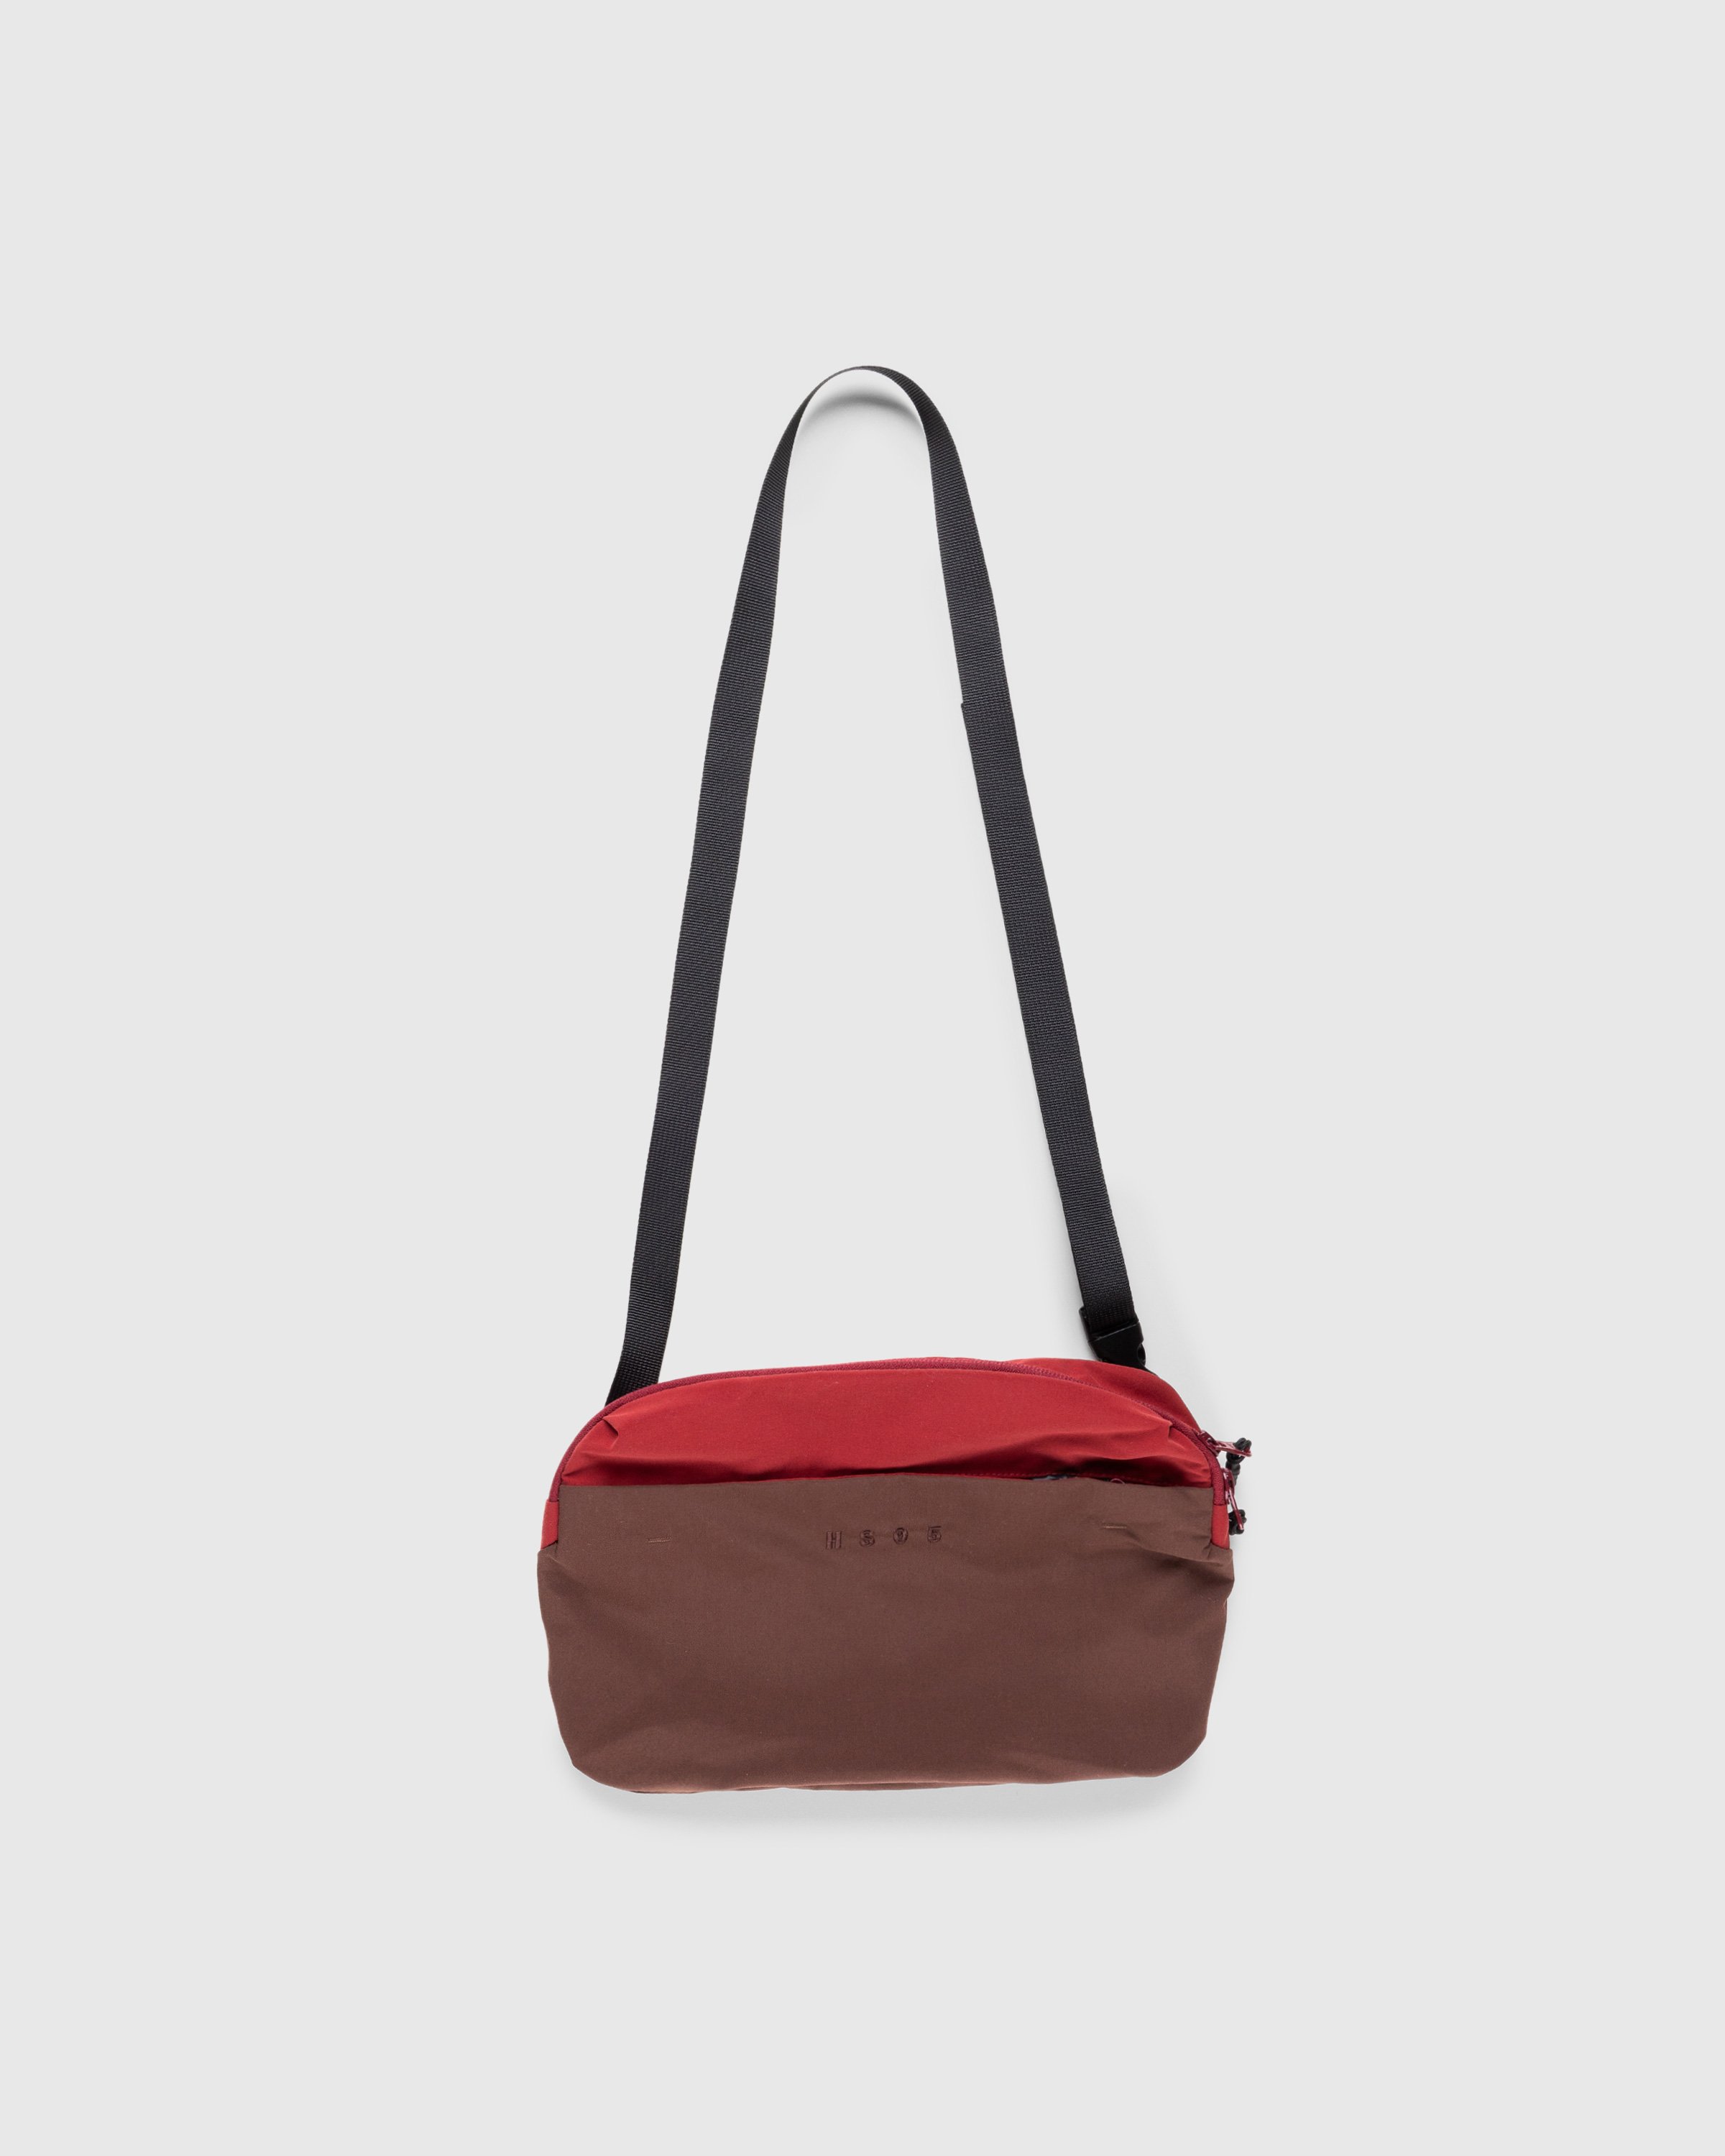 Highsnobiety HS05 - 3 Layer Nylon Side Bag Red - Accessories - Red - Image 1